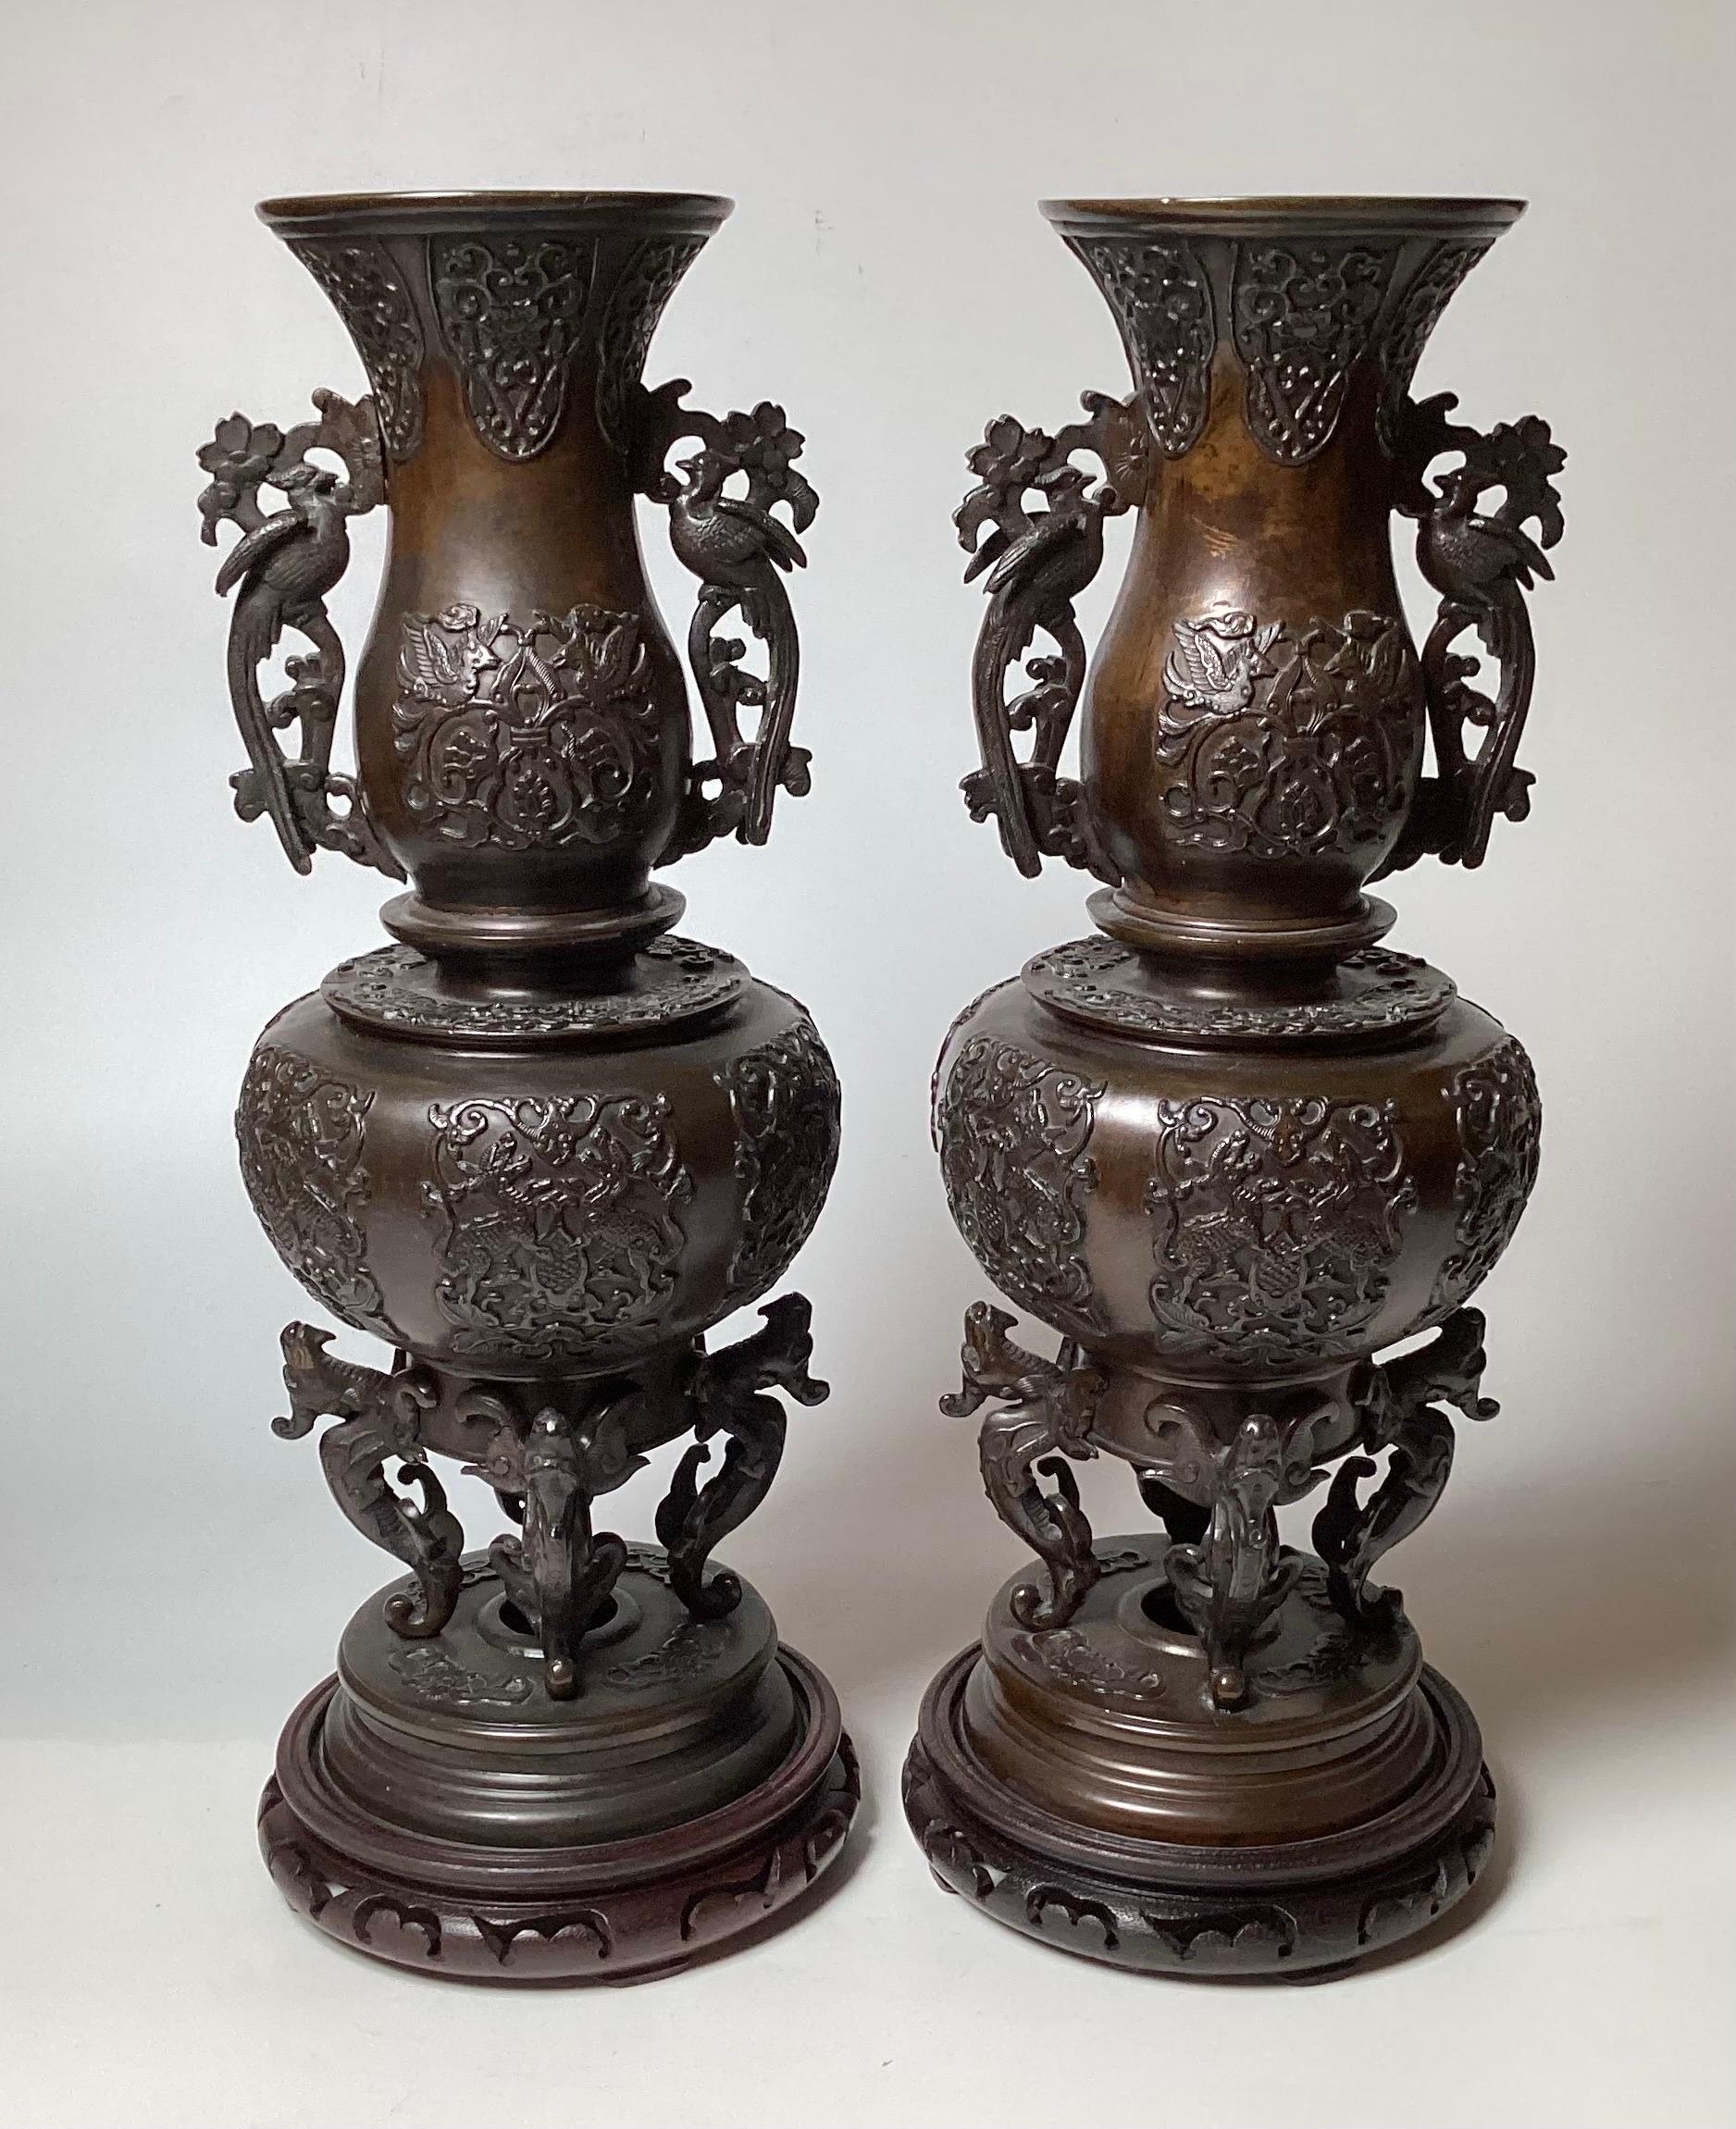 A Pair of Patinated Bronze Meiji Period Figural Tall Vases  In Excellent Condition For Sale In Lambertville, NJ